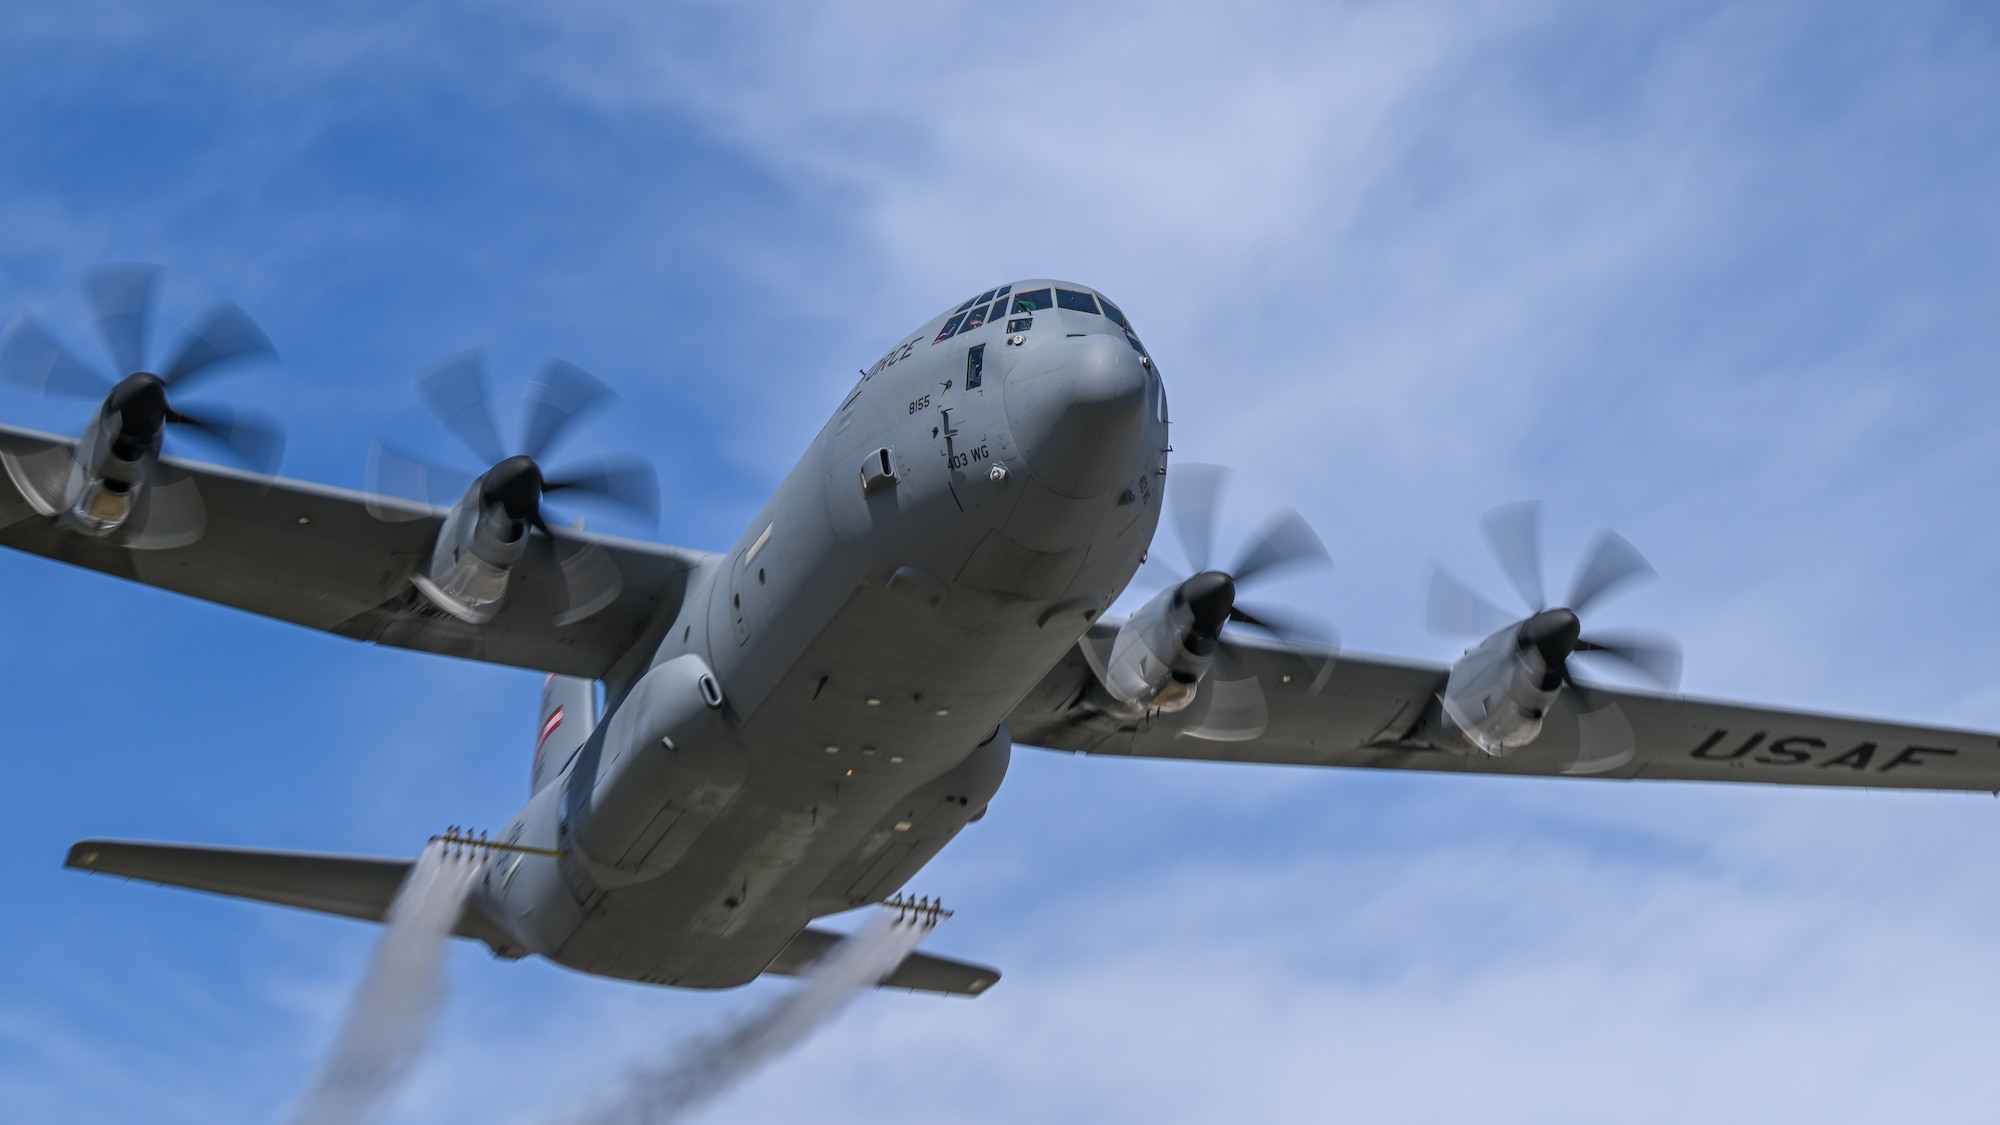 A C-130J-30 Super Hercules aircraft from Keesler Air Force Base, Mississippi, sprays water during a low pass at Youngstown Air Reserve Station, Ohio, as part of a flight test of the 910th Airlift Wing's unique electronic modular aerial spray system, March 25, 2024. The flight test was performed to ensure the operability of the spray system aboard the airframe as the 910th prepares to upgrade its aging C-130H Hercules fleet to new J-30 models. The project was carried out in partnership between 910th Airlift Wing maintenance personnel and aerial spray specialists, members of the Warner Robins Air Logistics Complex C-130 System Program Office, Georgia, and test flight aircrew from the Little Rock Air Force Base, Arkansas. (U.S. Air Force photo by Eric M. White)